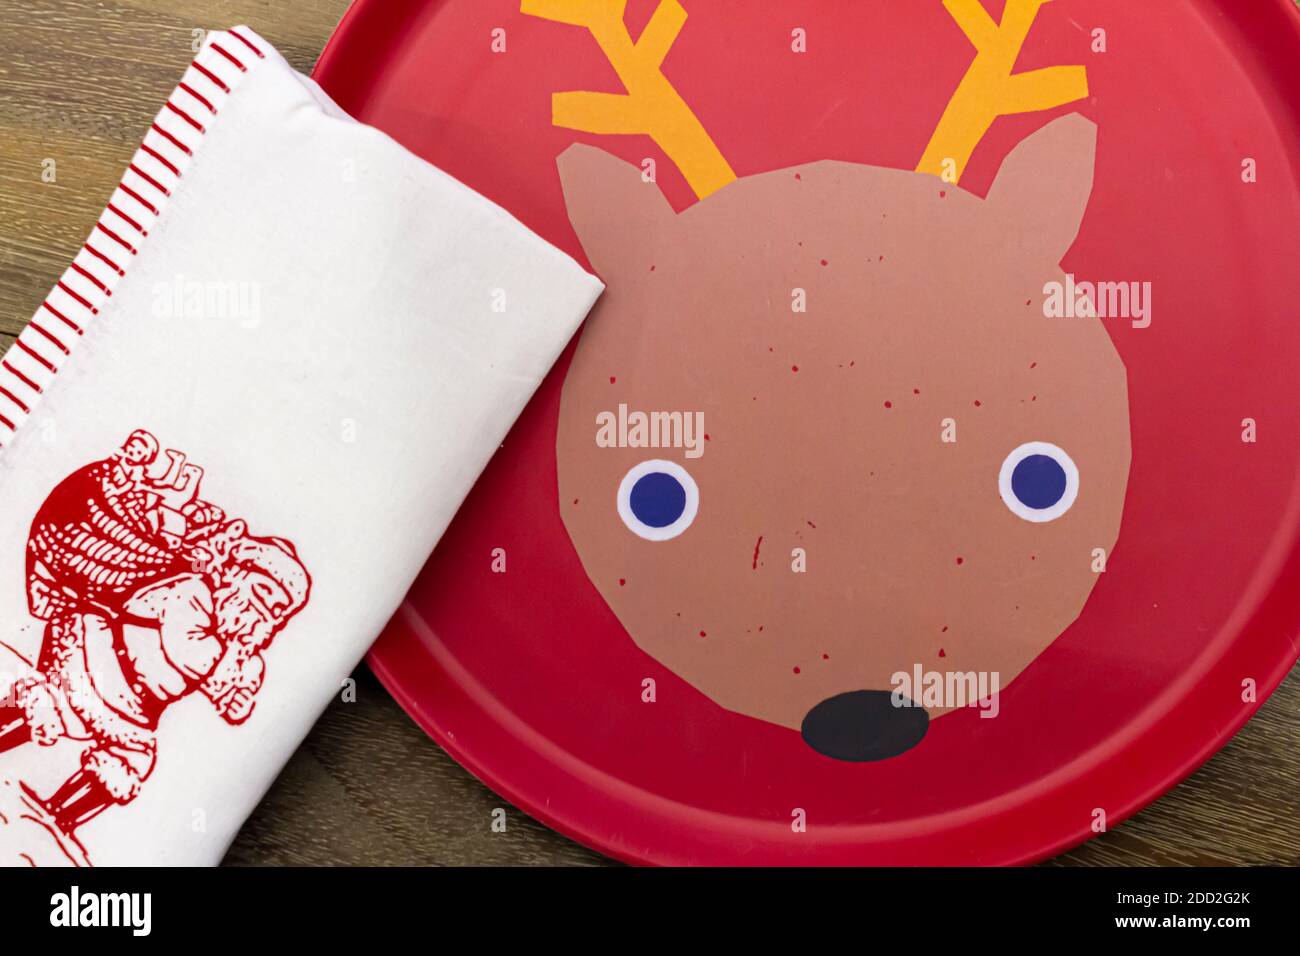 A red disposable plate with a funny rein deer figure inside is placed on top of a wooden table. A white cloth napkin with Santa Claus image on is plac Stock Photo